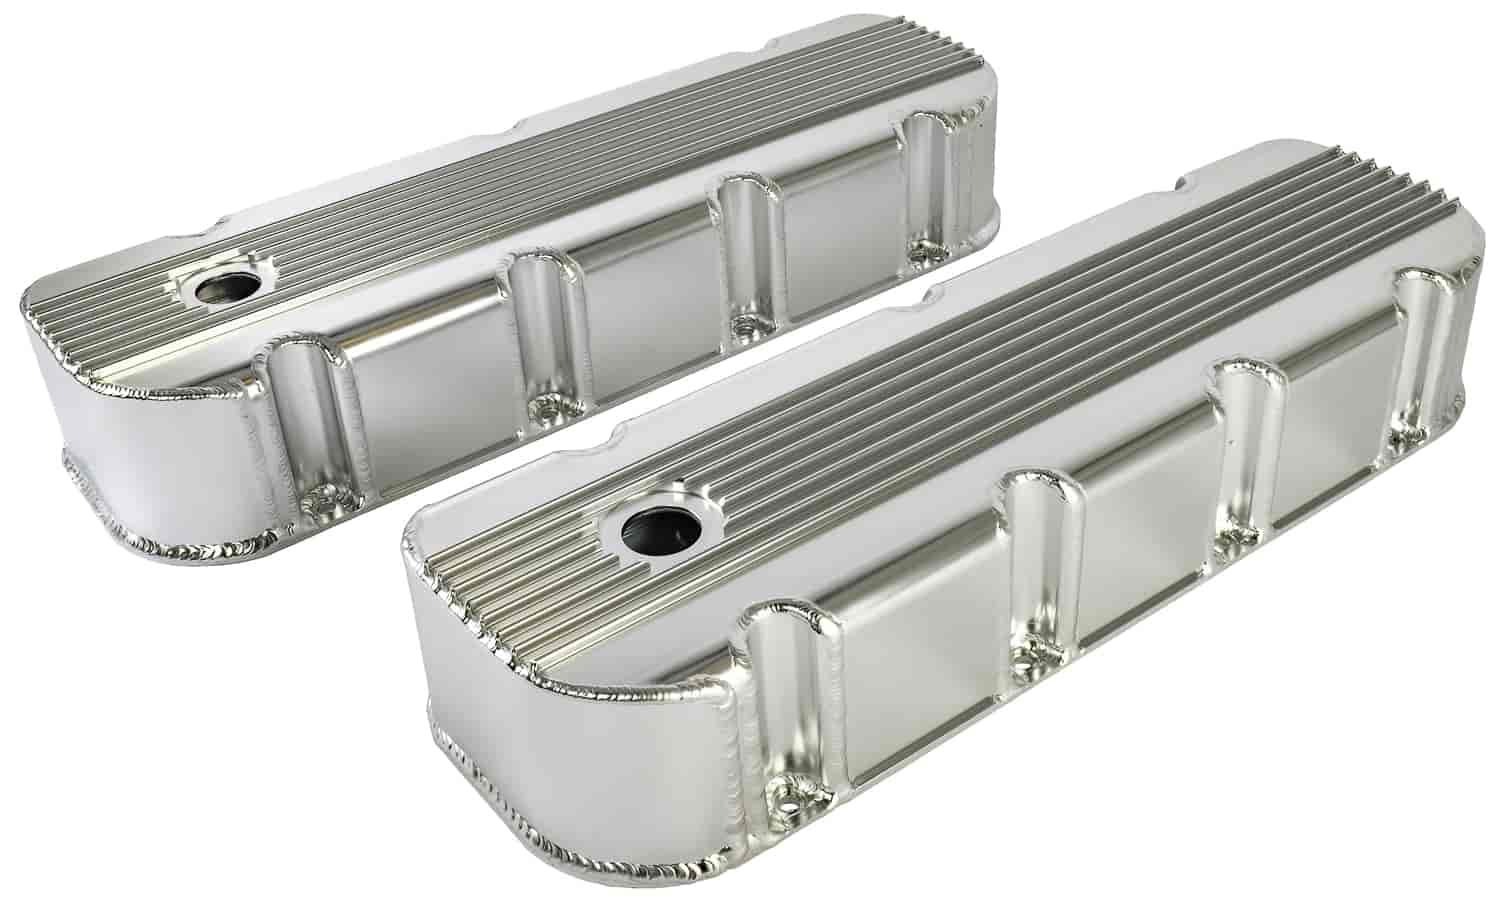 Fabricated Aluminum Valve Covers for Big Block Chevy